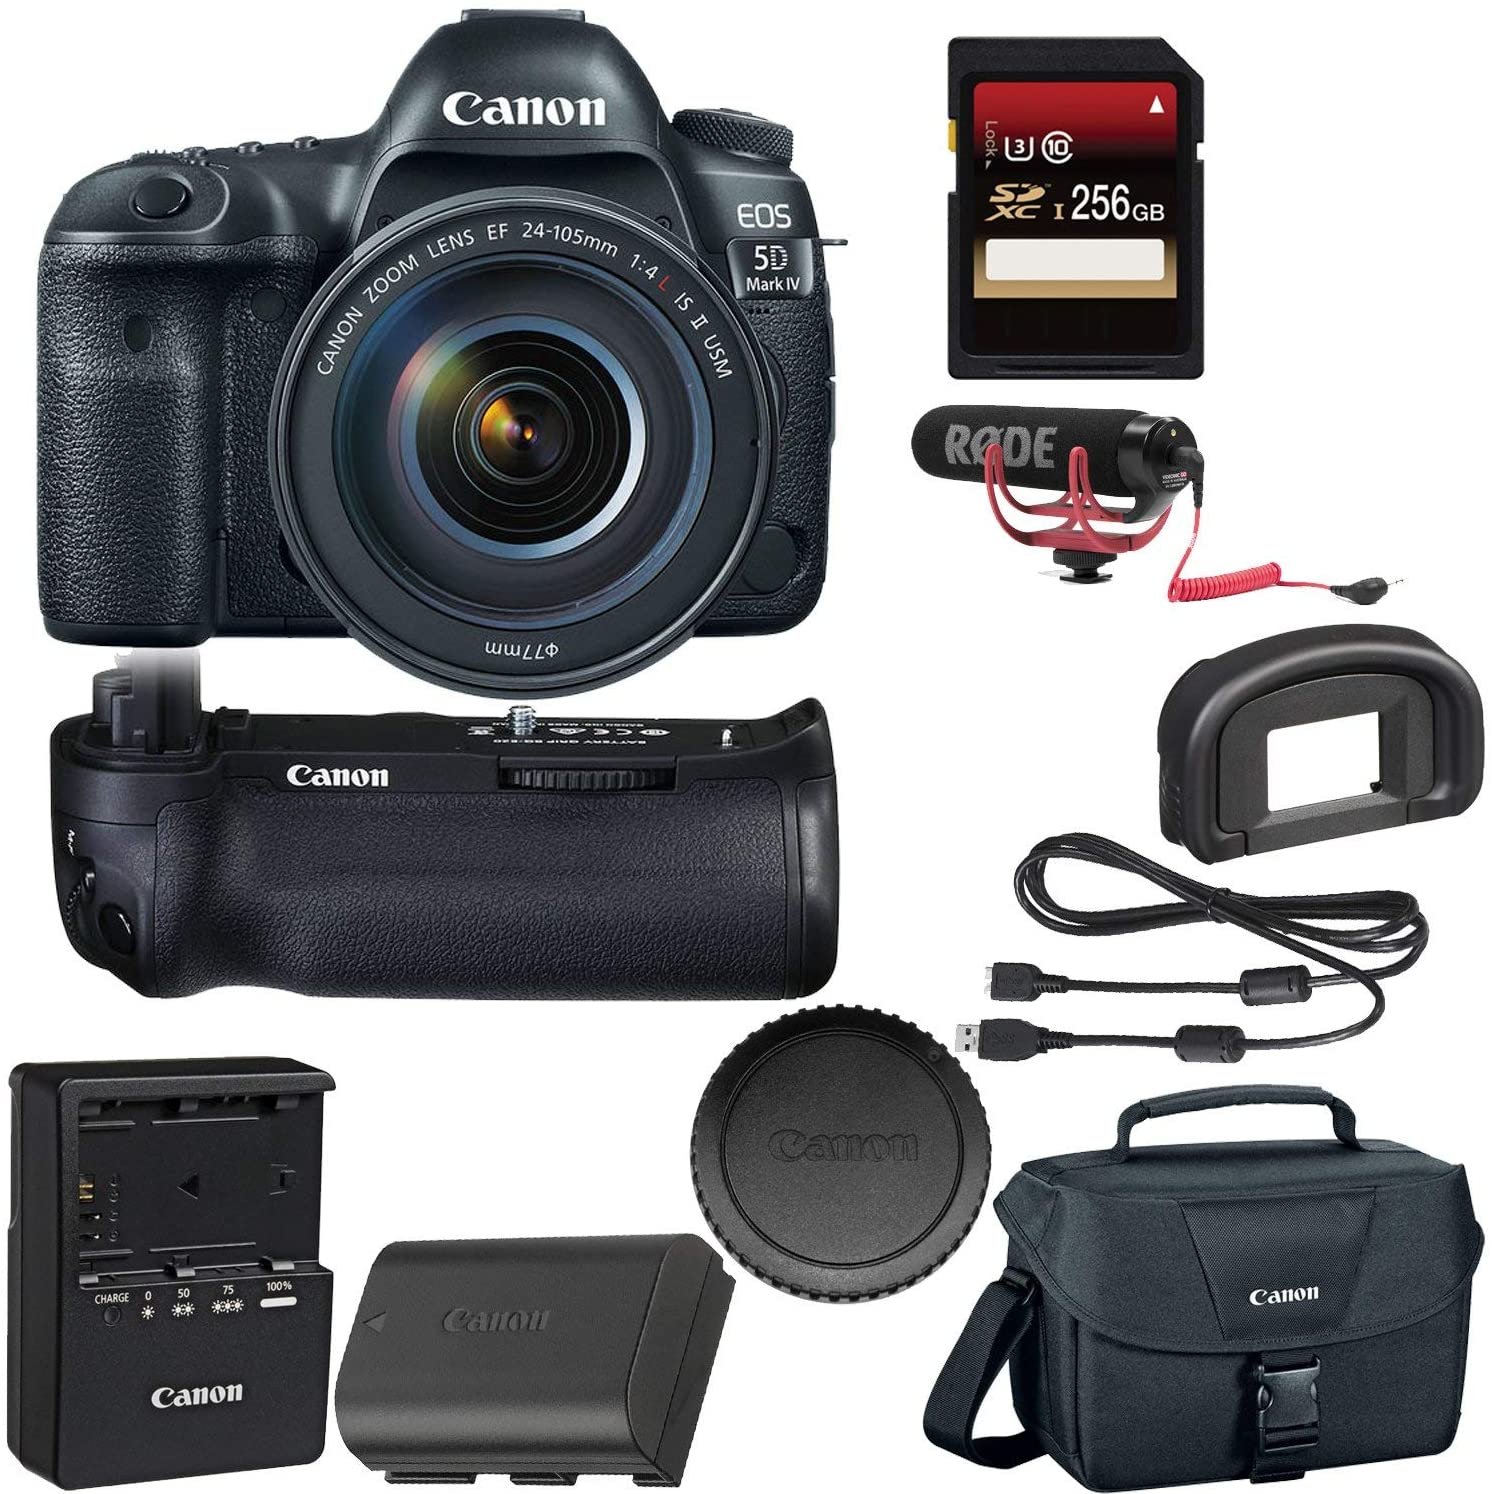 Canon EOS 5D Mark IV DSLR Camera with 24-105mm f/4L II Lens + Canon BGE20 Grip + 256GB SDXC Card + Rode VideoMic GO + More - image 2 of 7